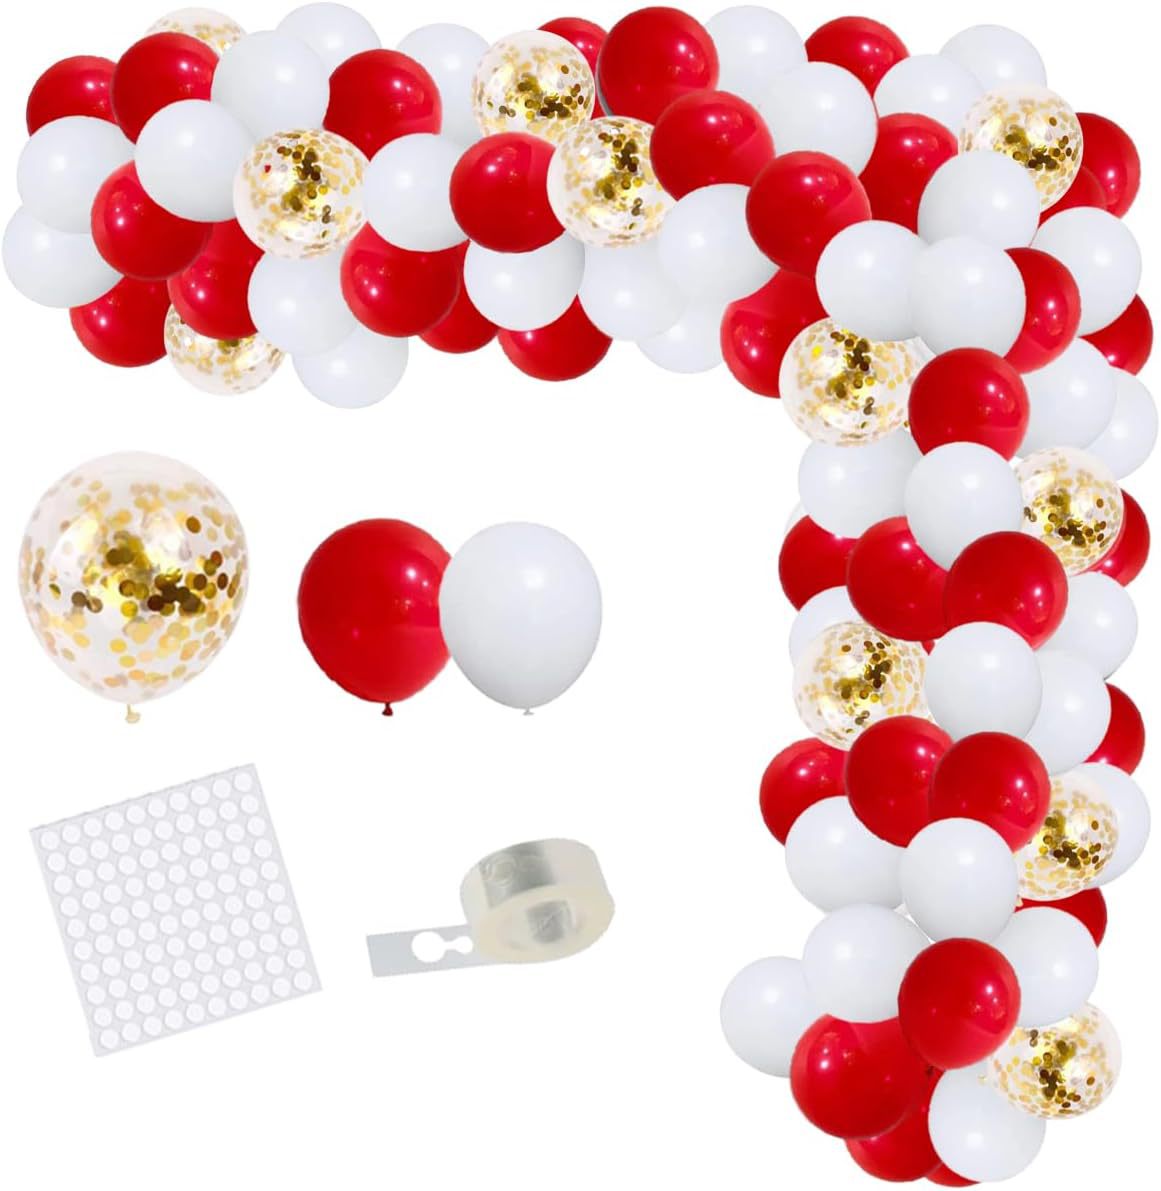 Red White Gold Sequins Balloon Set Birthday Party Baby Shower Wedding Anniversary Graduation Party Decoration